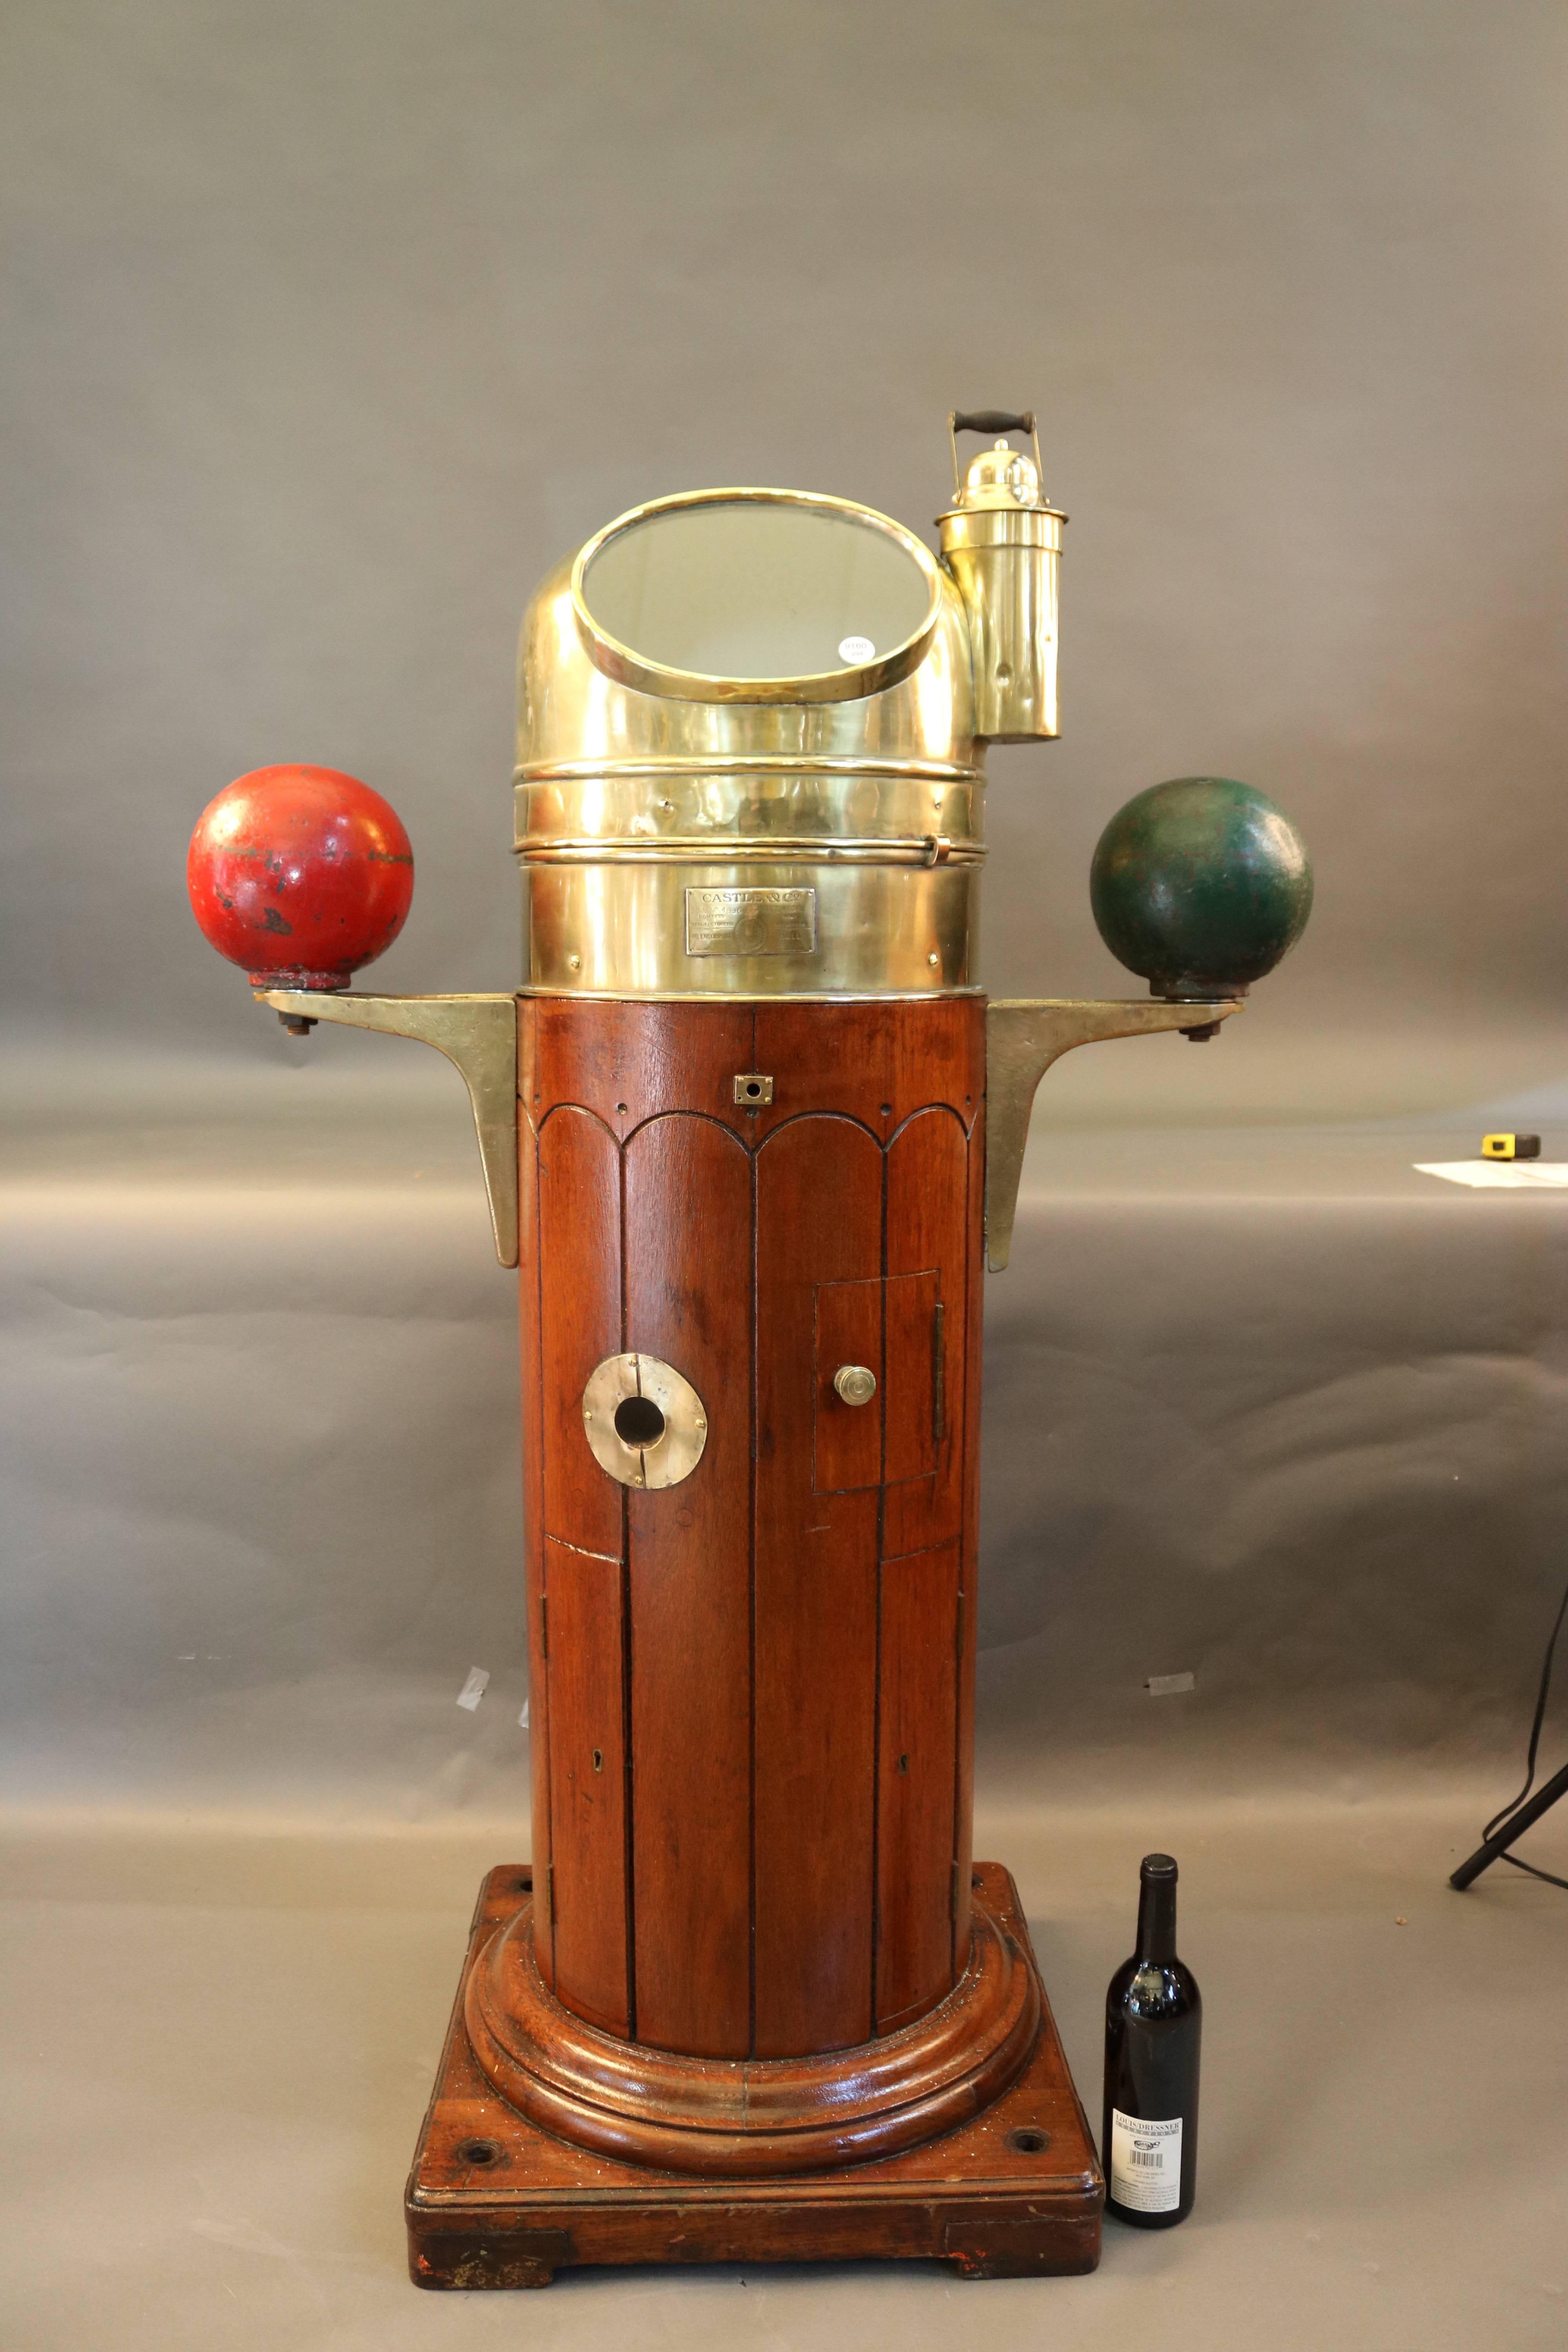 Binnacle by Castle and Co., compass of Hull England, with burner, compensating balls. Compass is a Mark I US Navy. Dimensions: 56" H x 33" W.